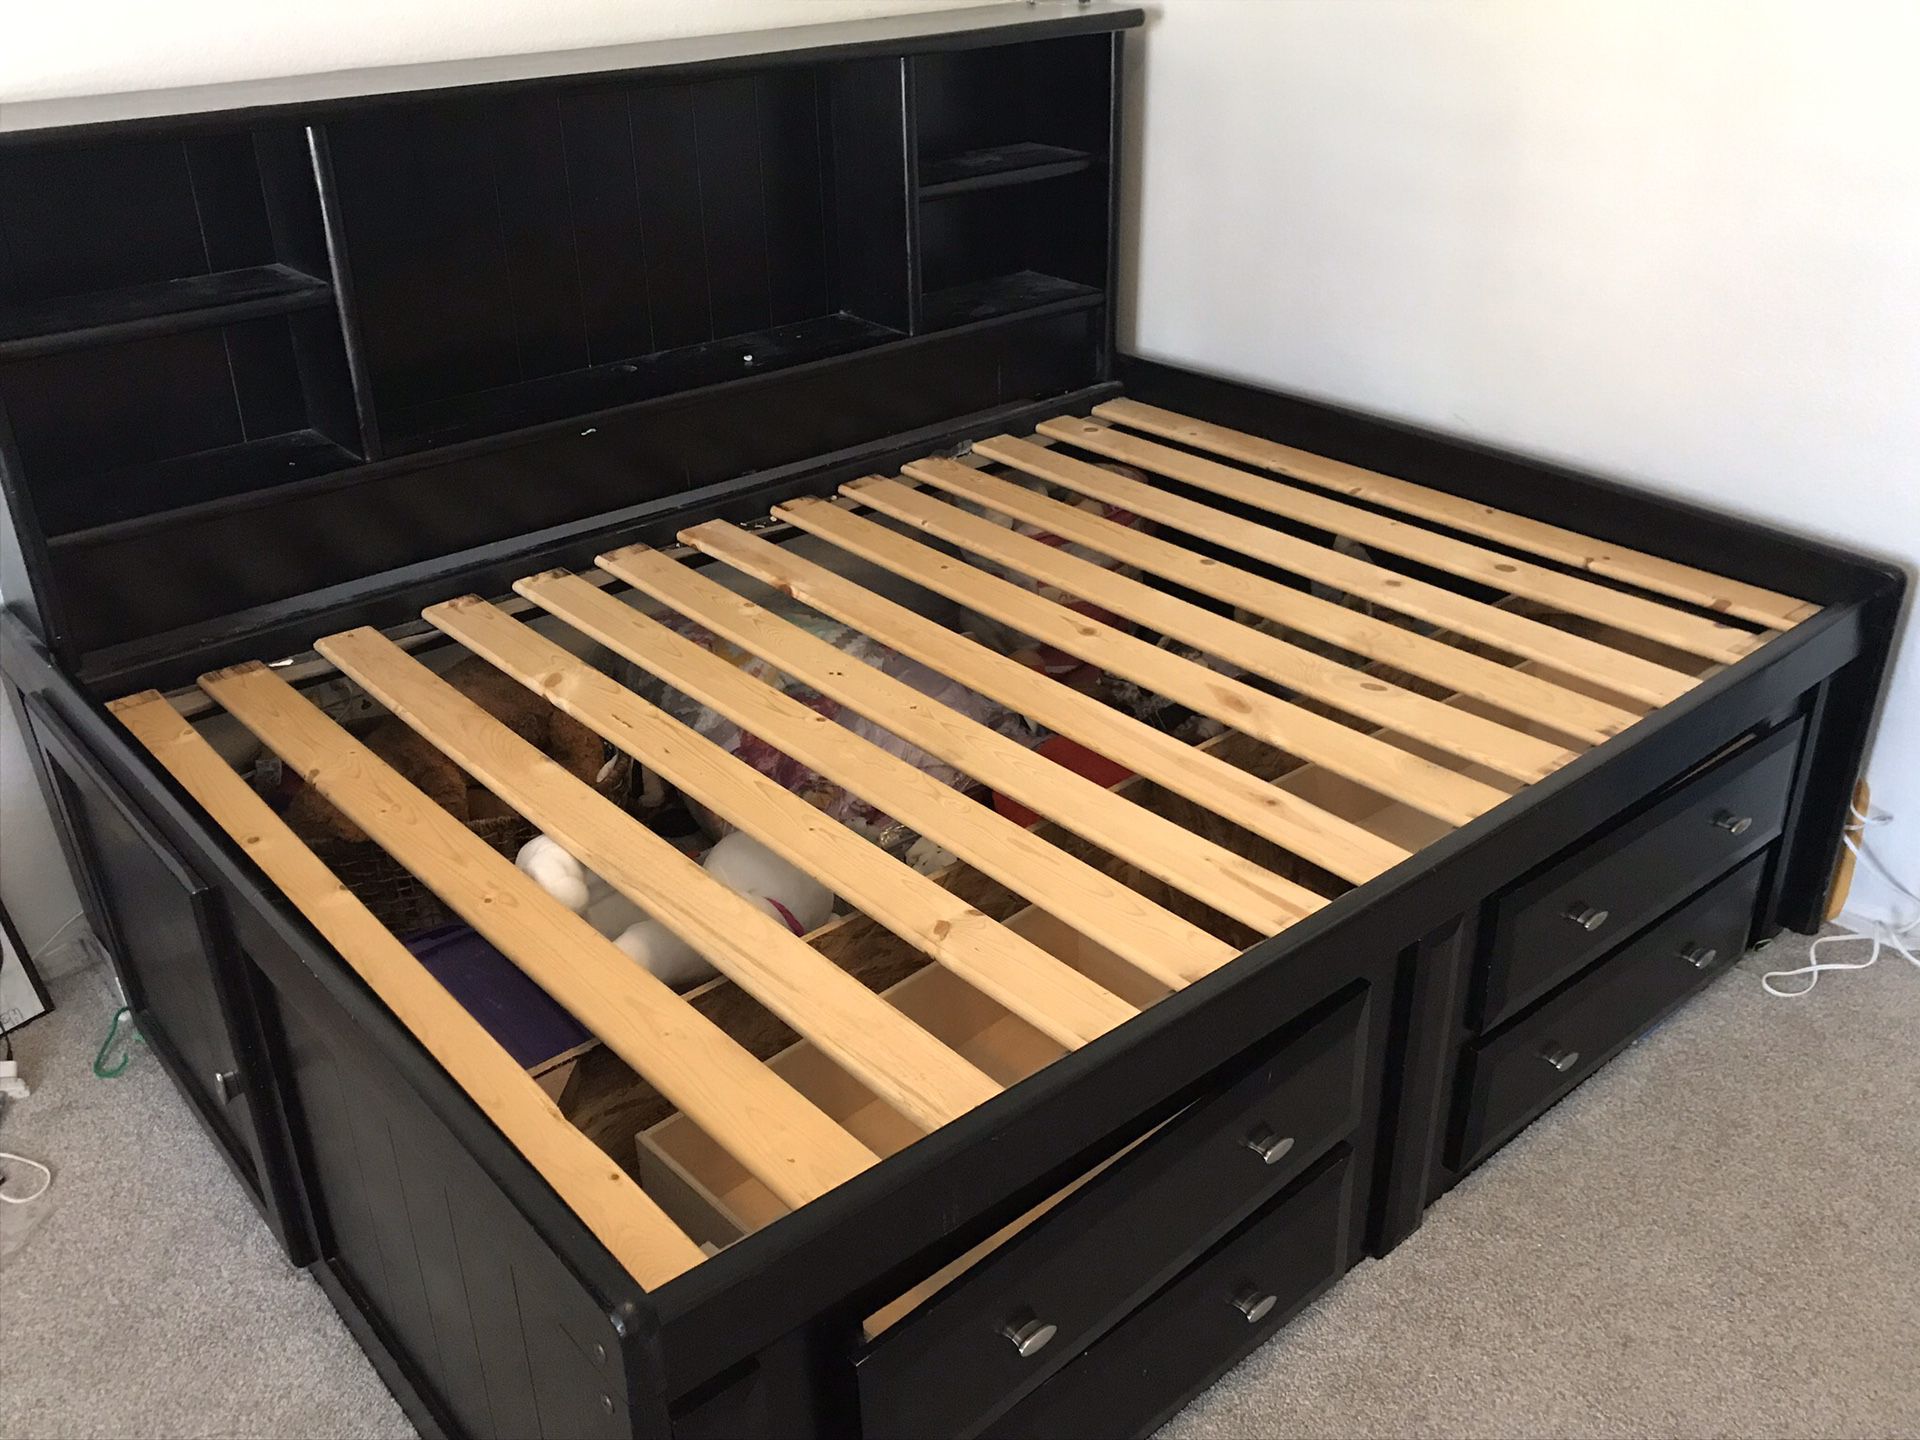 Bed frame full size with drawers under storage and shelves